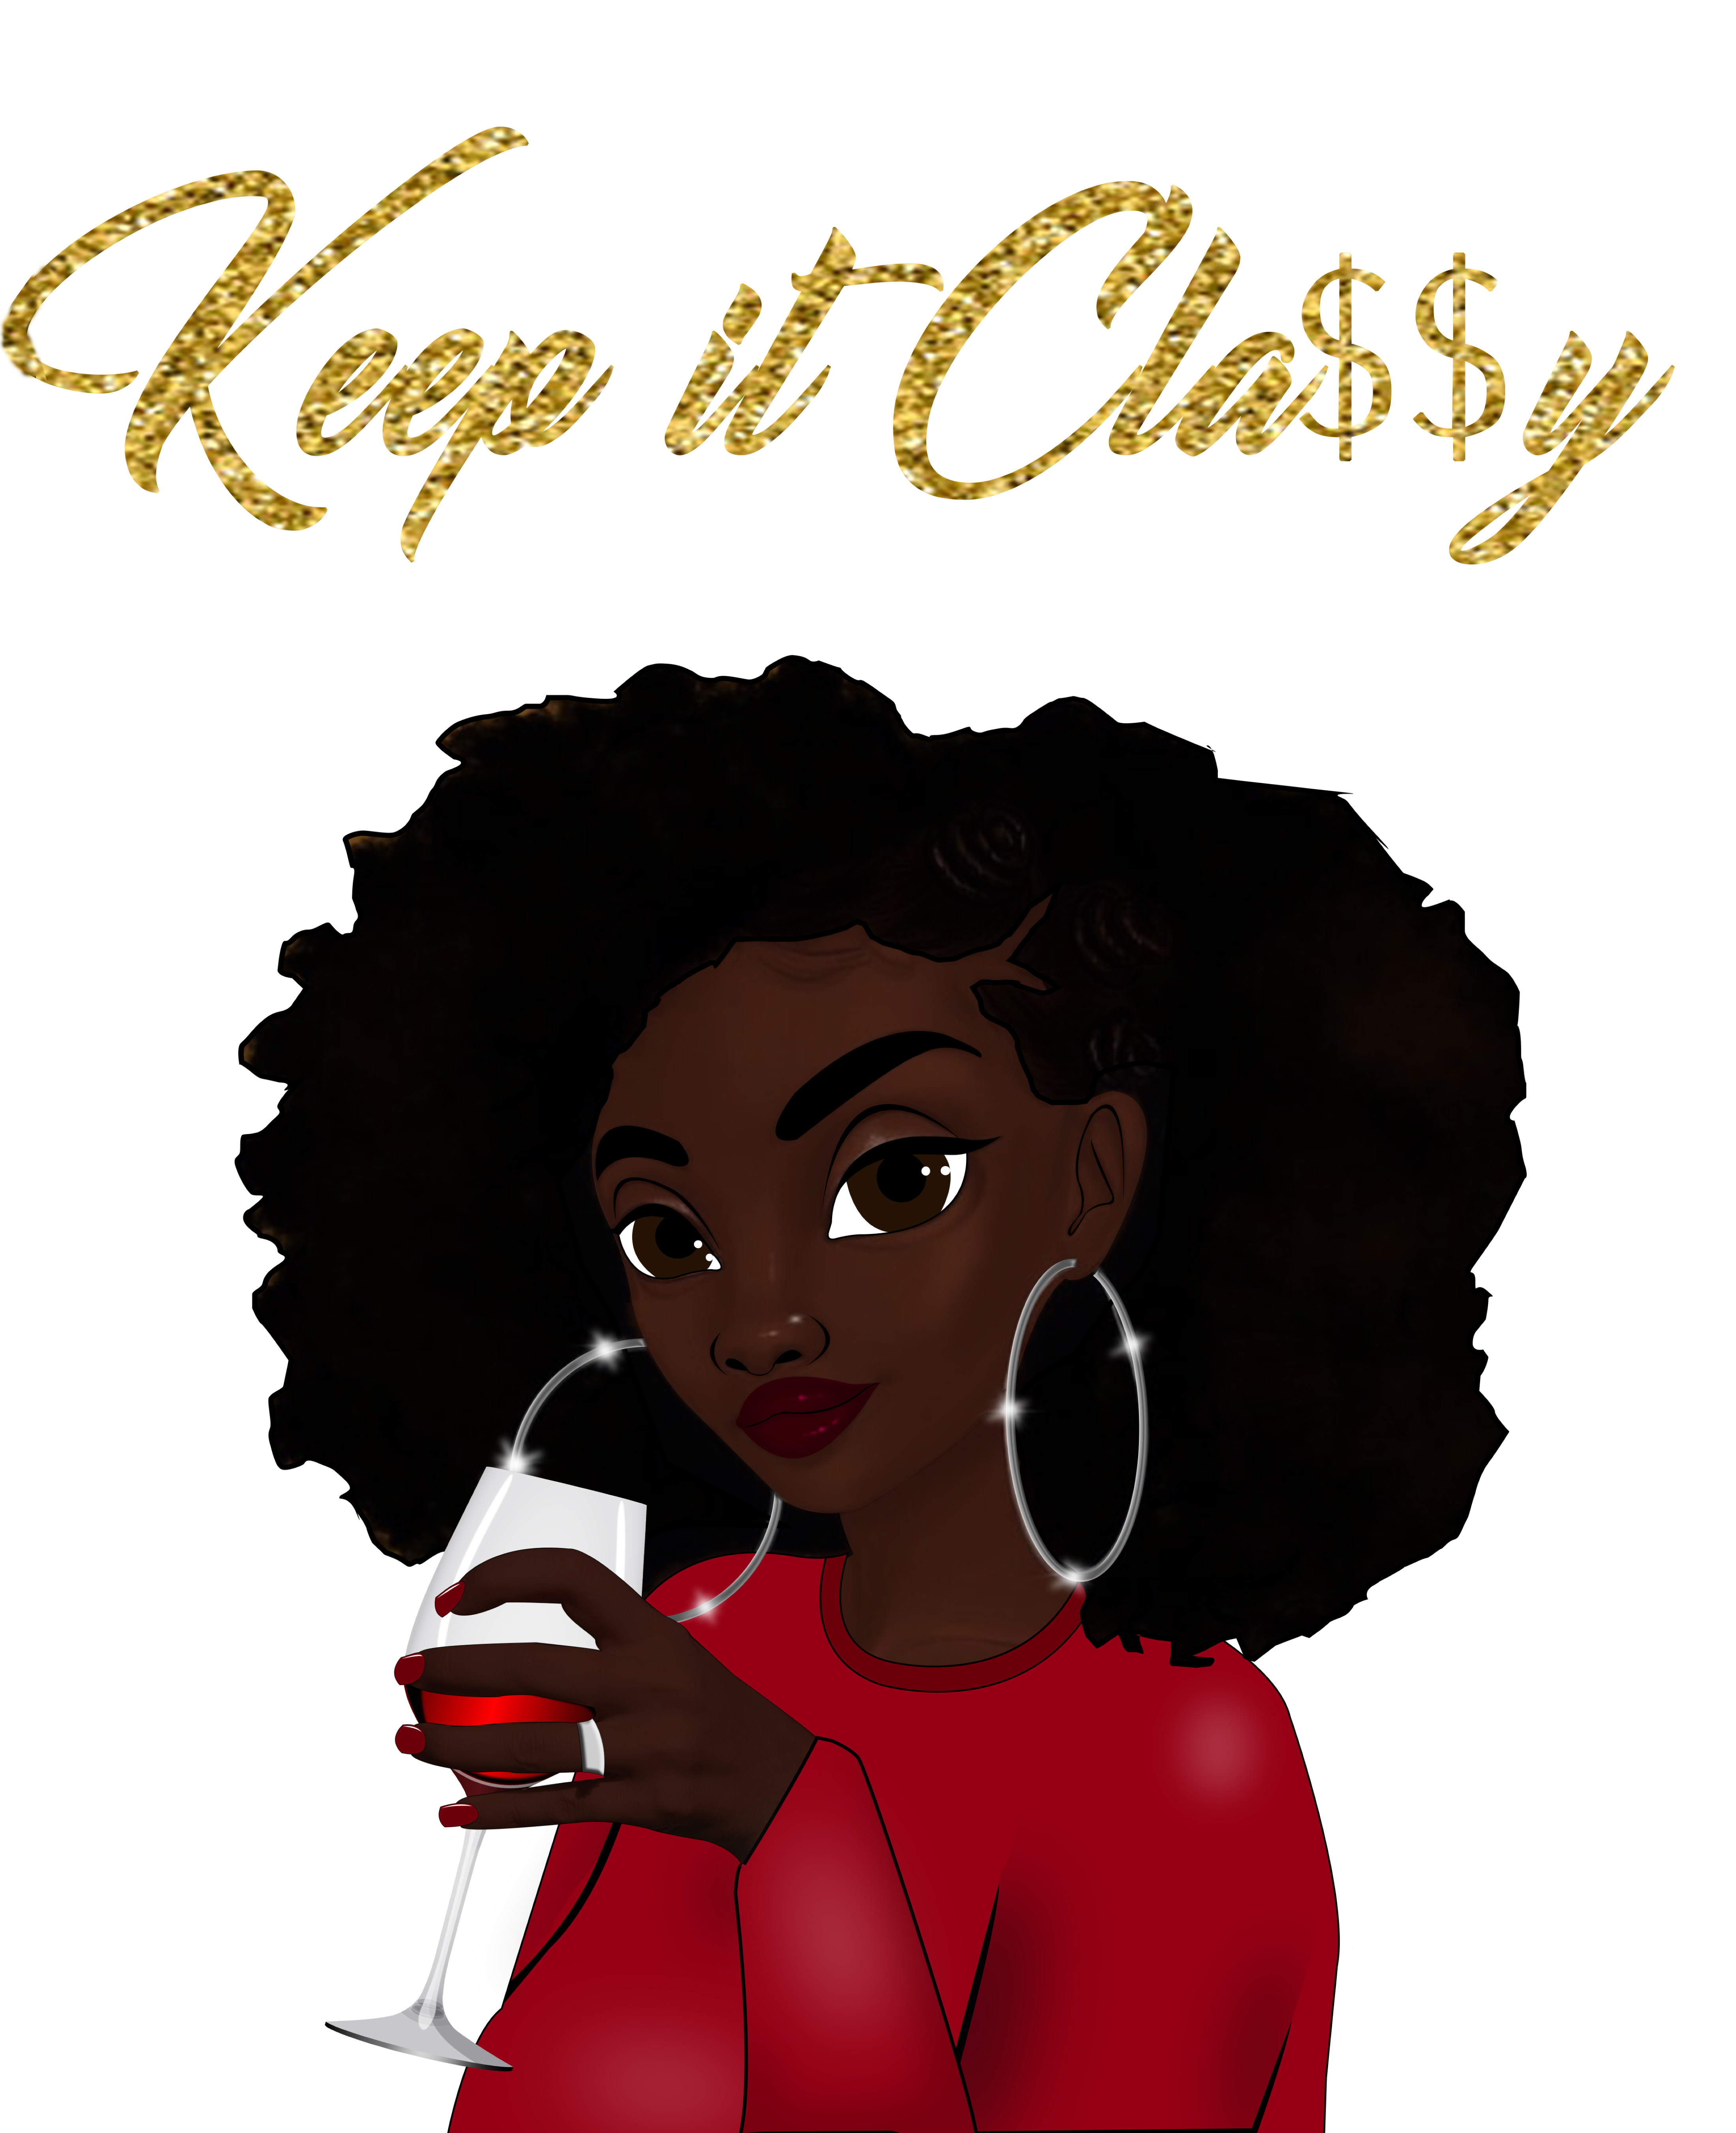 The logo or business face of "Keep It Classy Creations LLC"